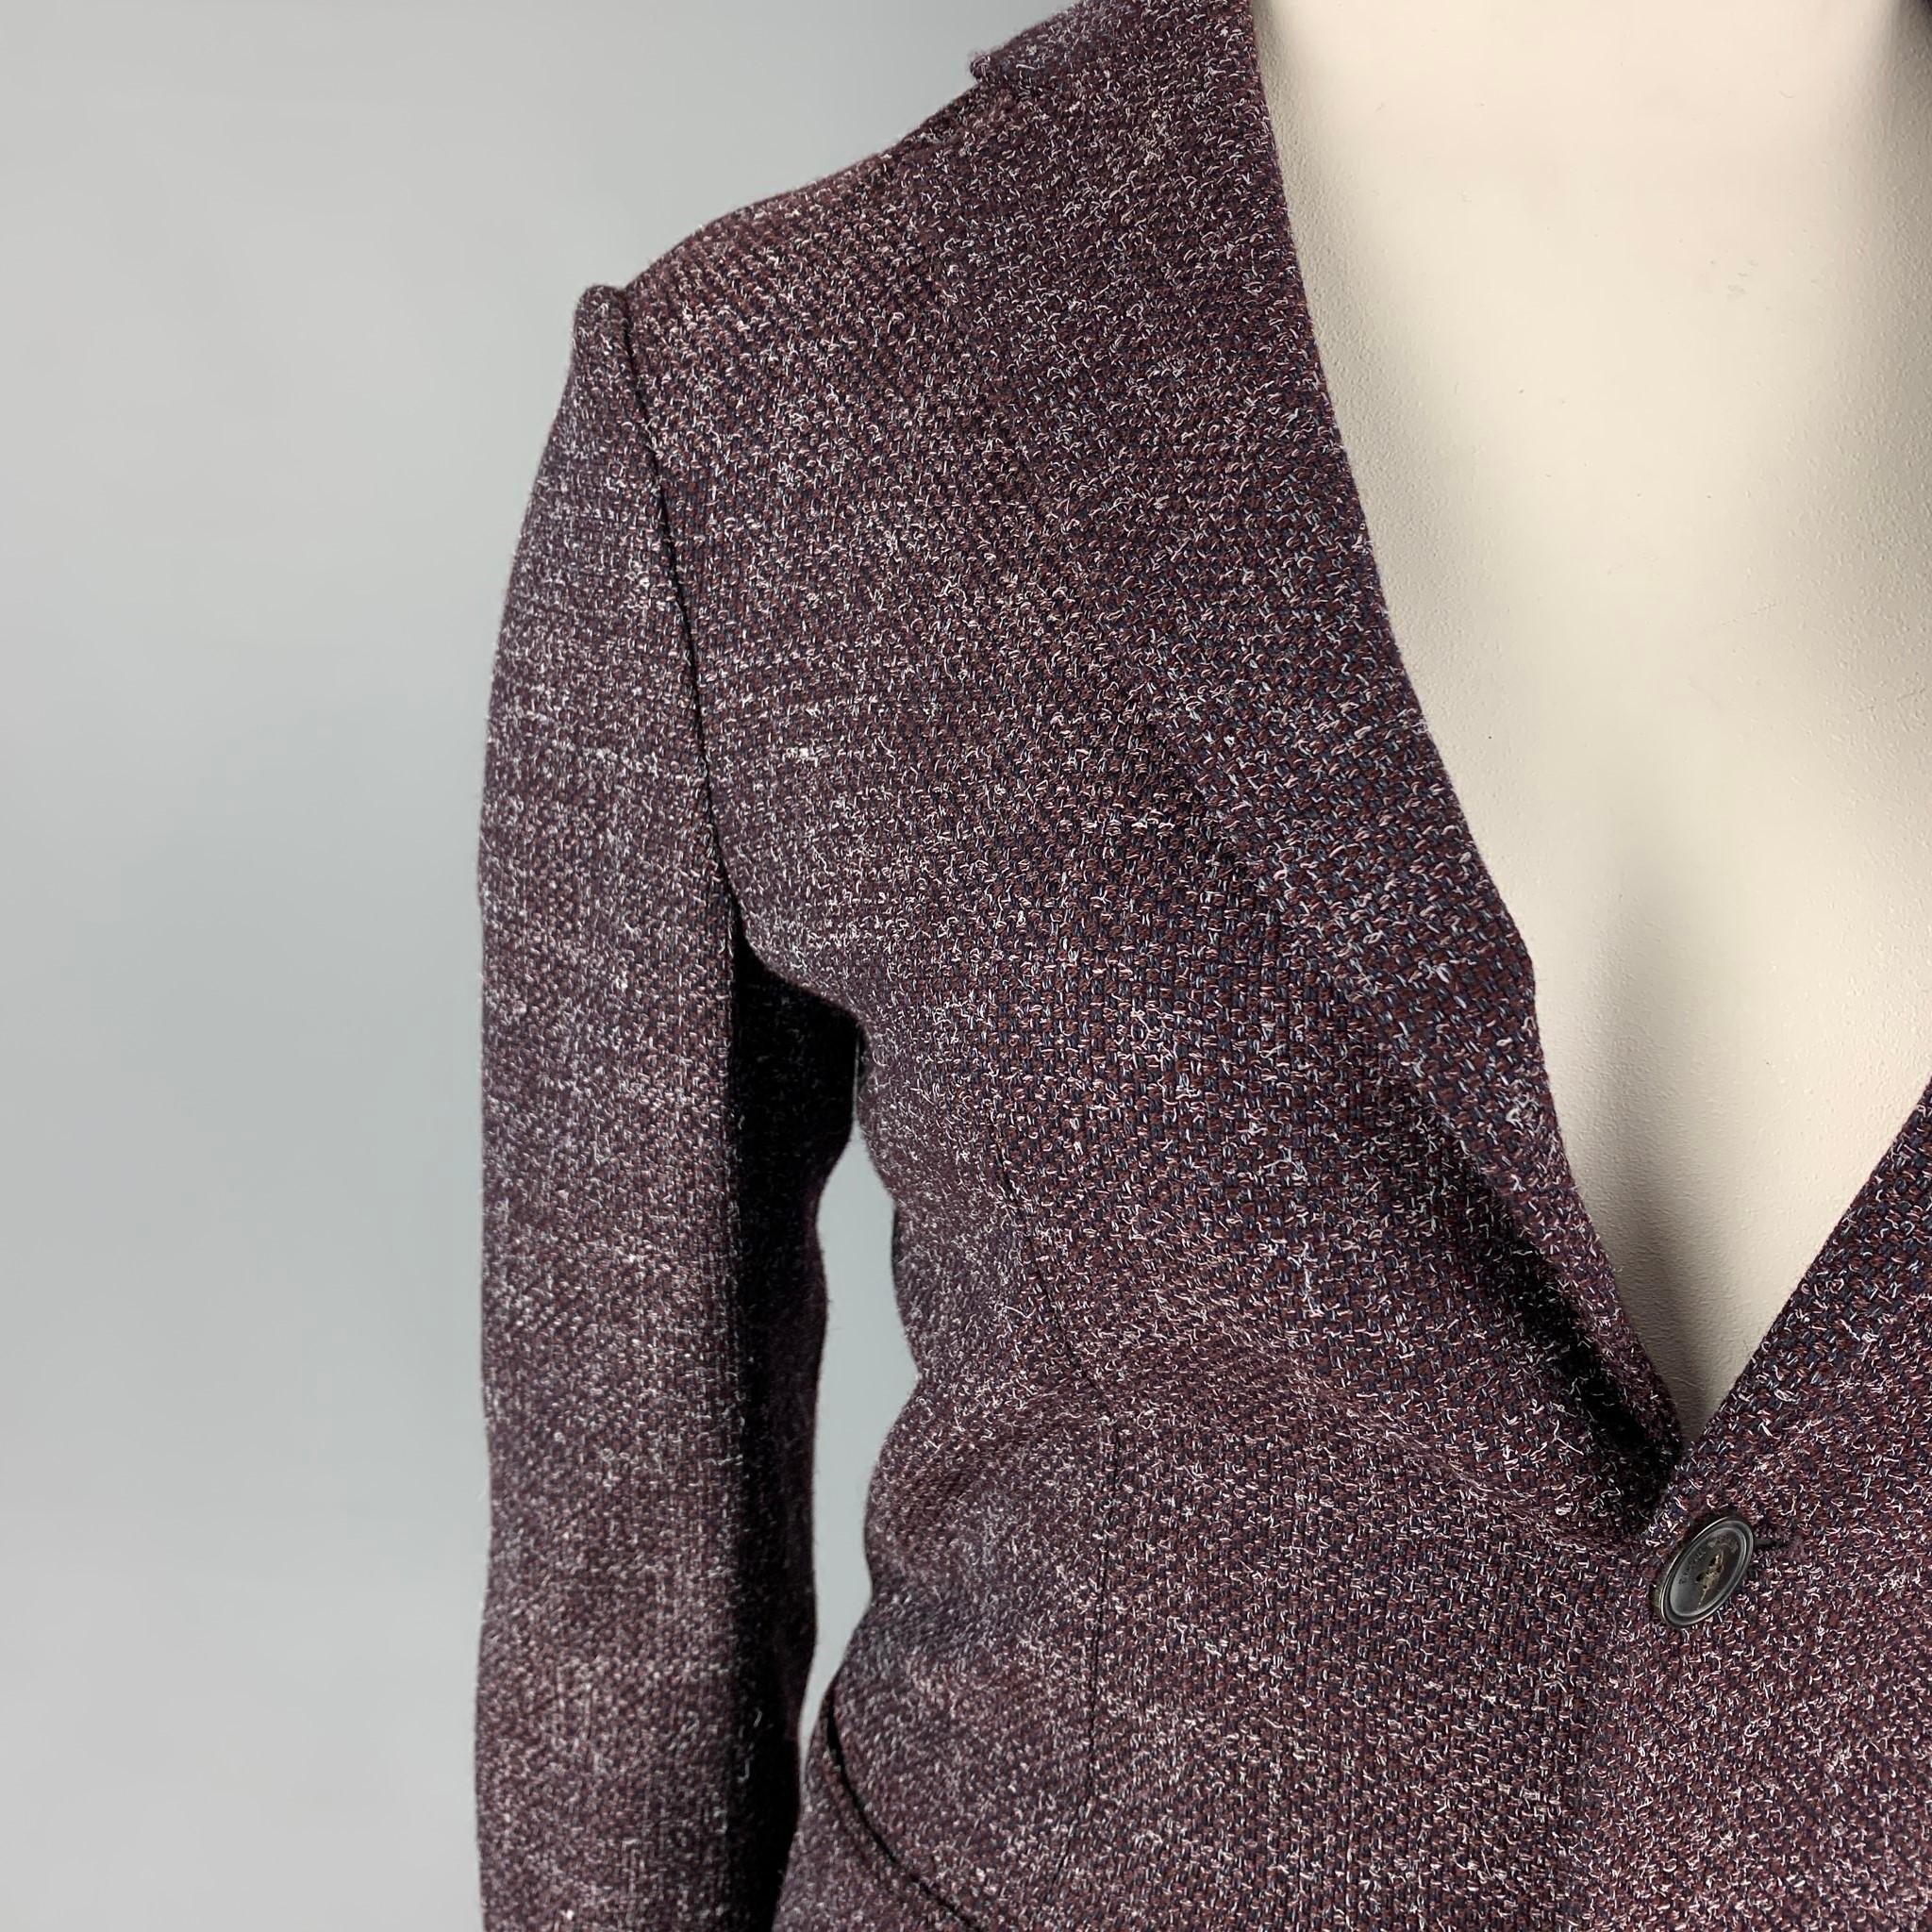 EMPORIO ARMANI blazer comes in a purple & grey heather material featuring a notch lapel, slit pockets, double back vent, and a double button closure. 

Very Good Pre-Owned Condition. Fabric tag removed.
Marked: Size tag